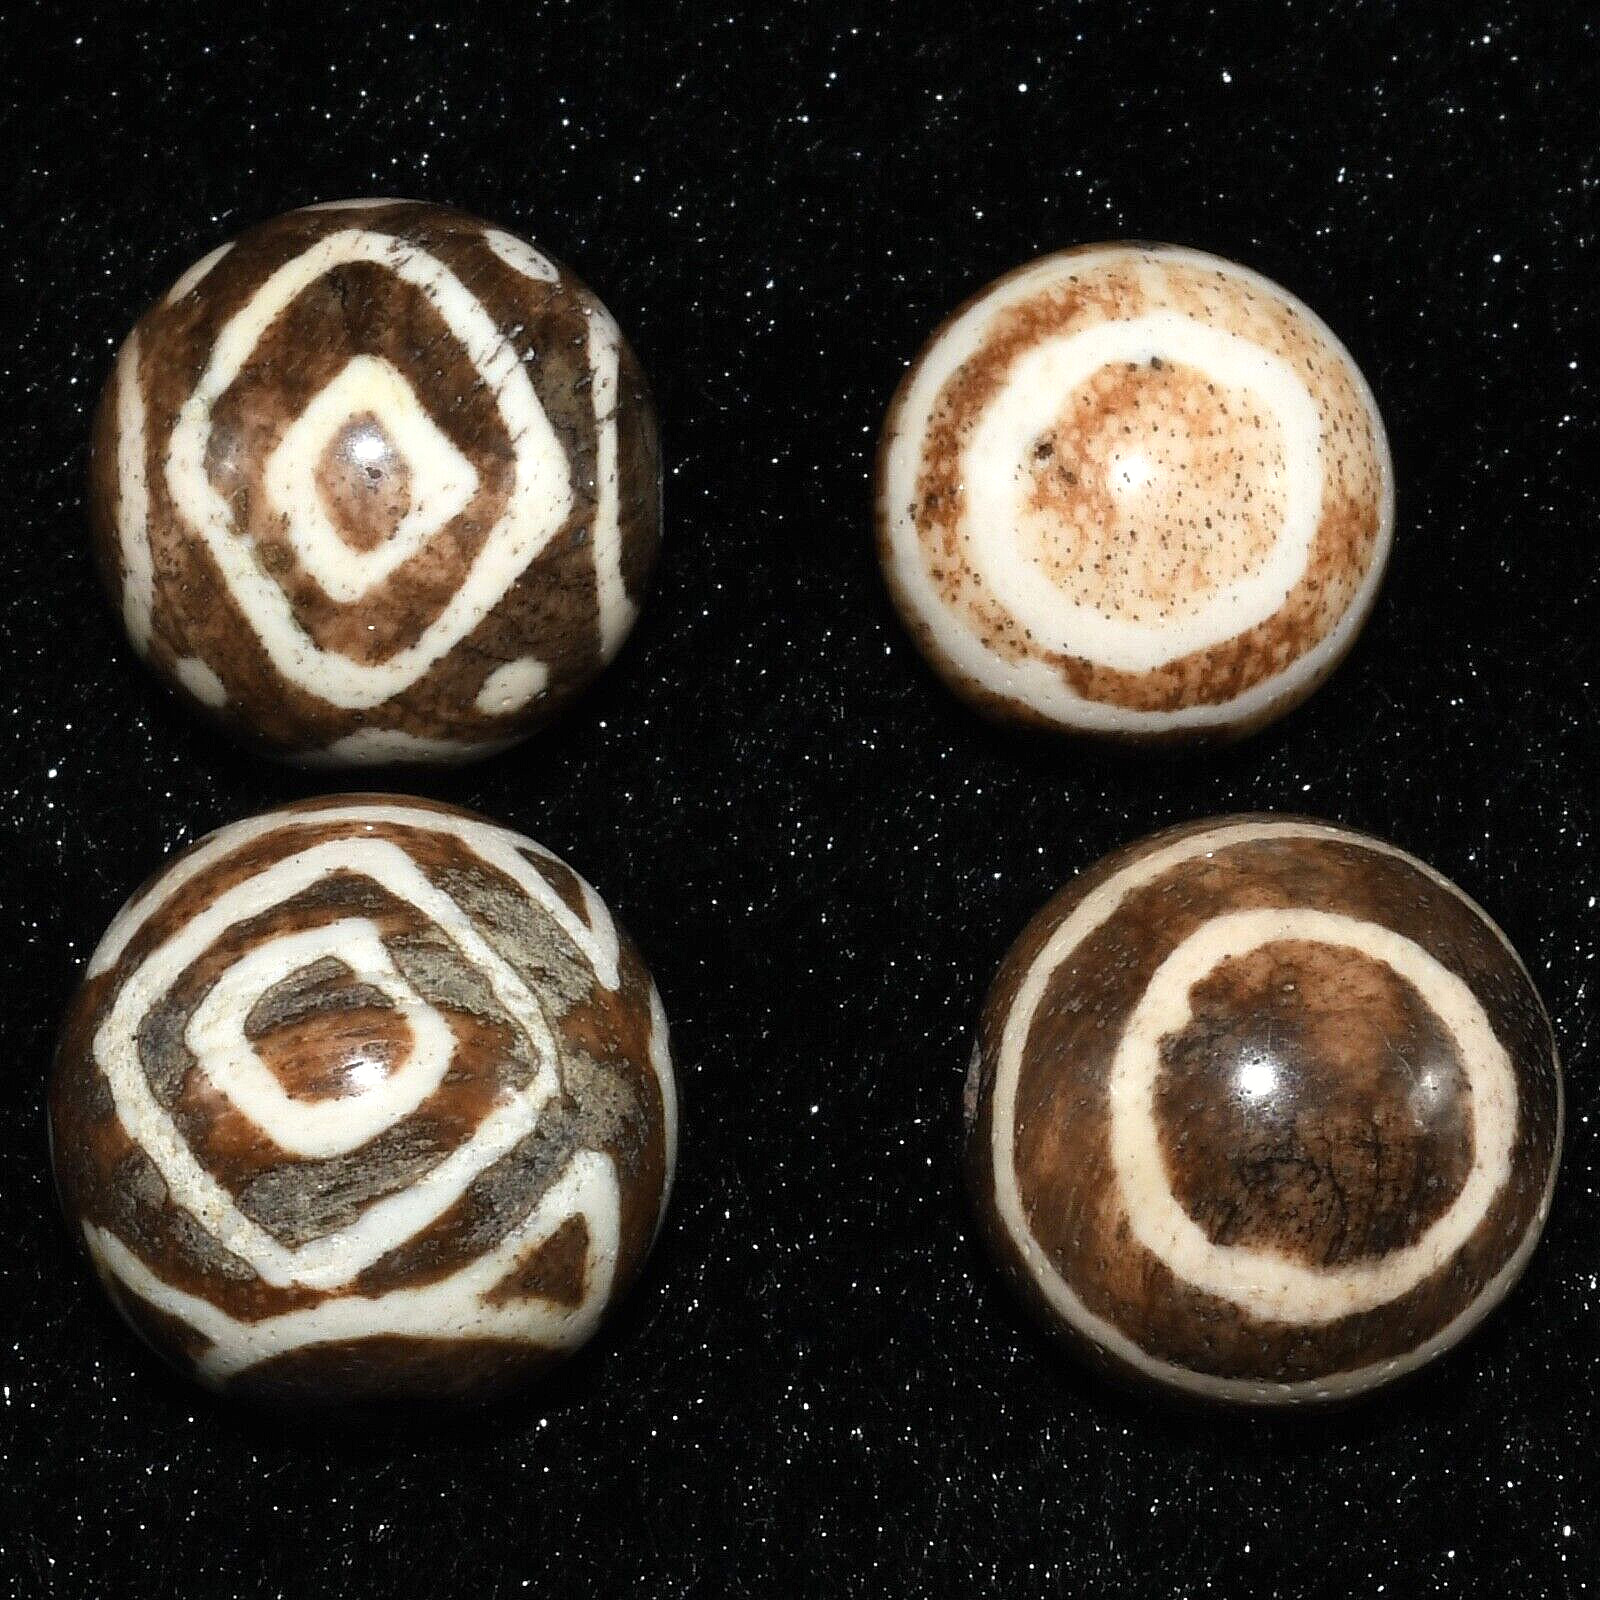 4 Ancient South East Asian Old Pyu Culture Stone Beads in Good Condition